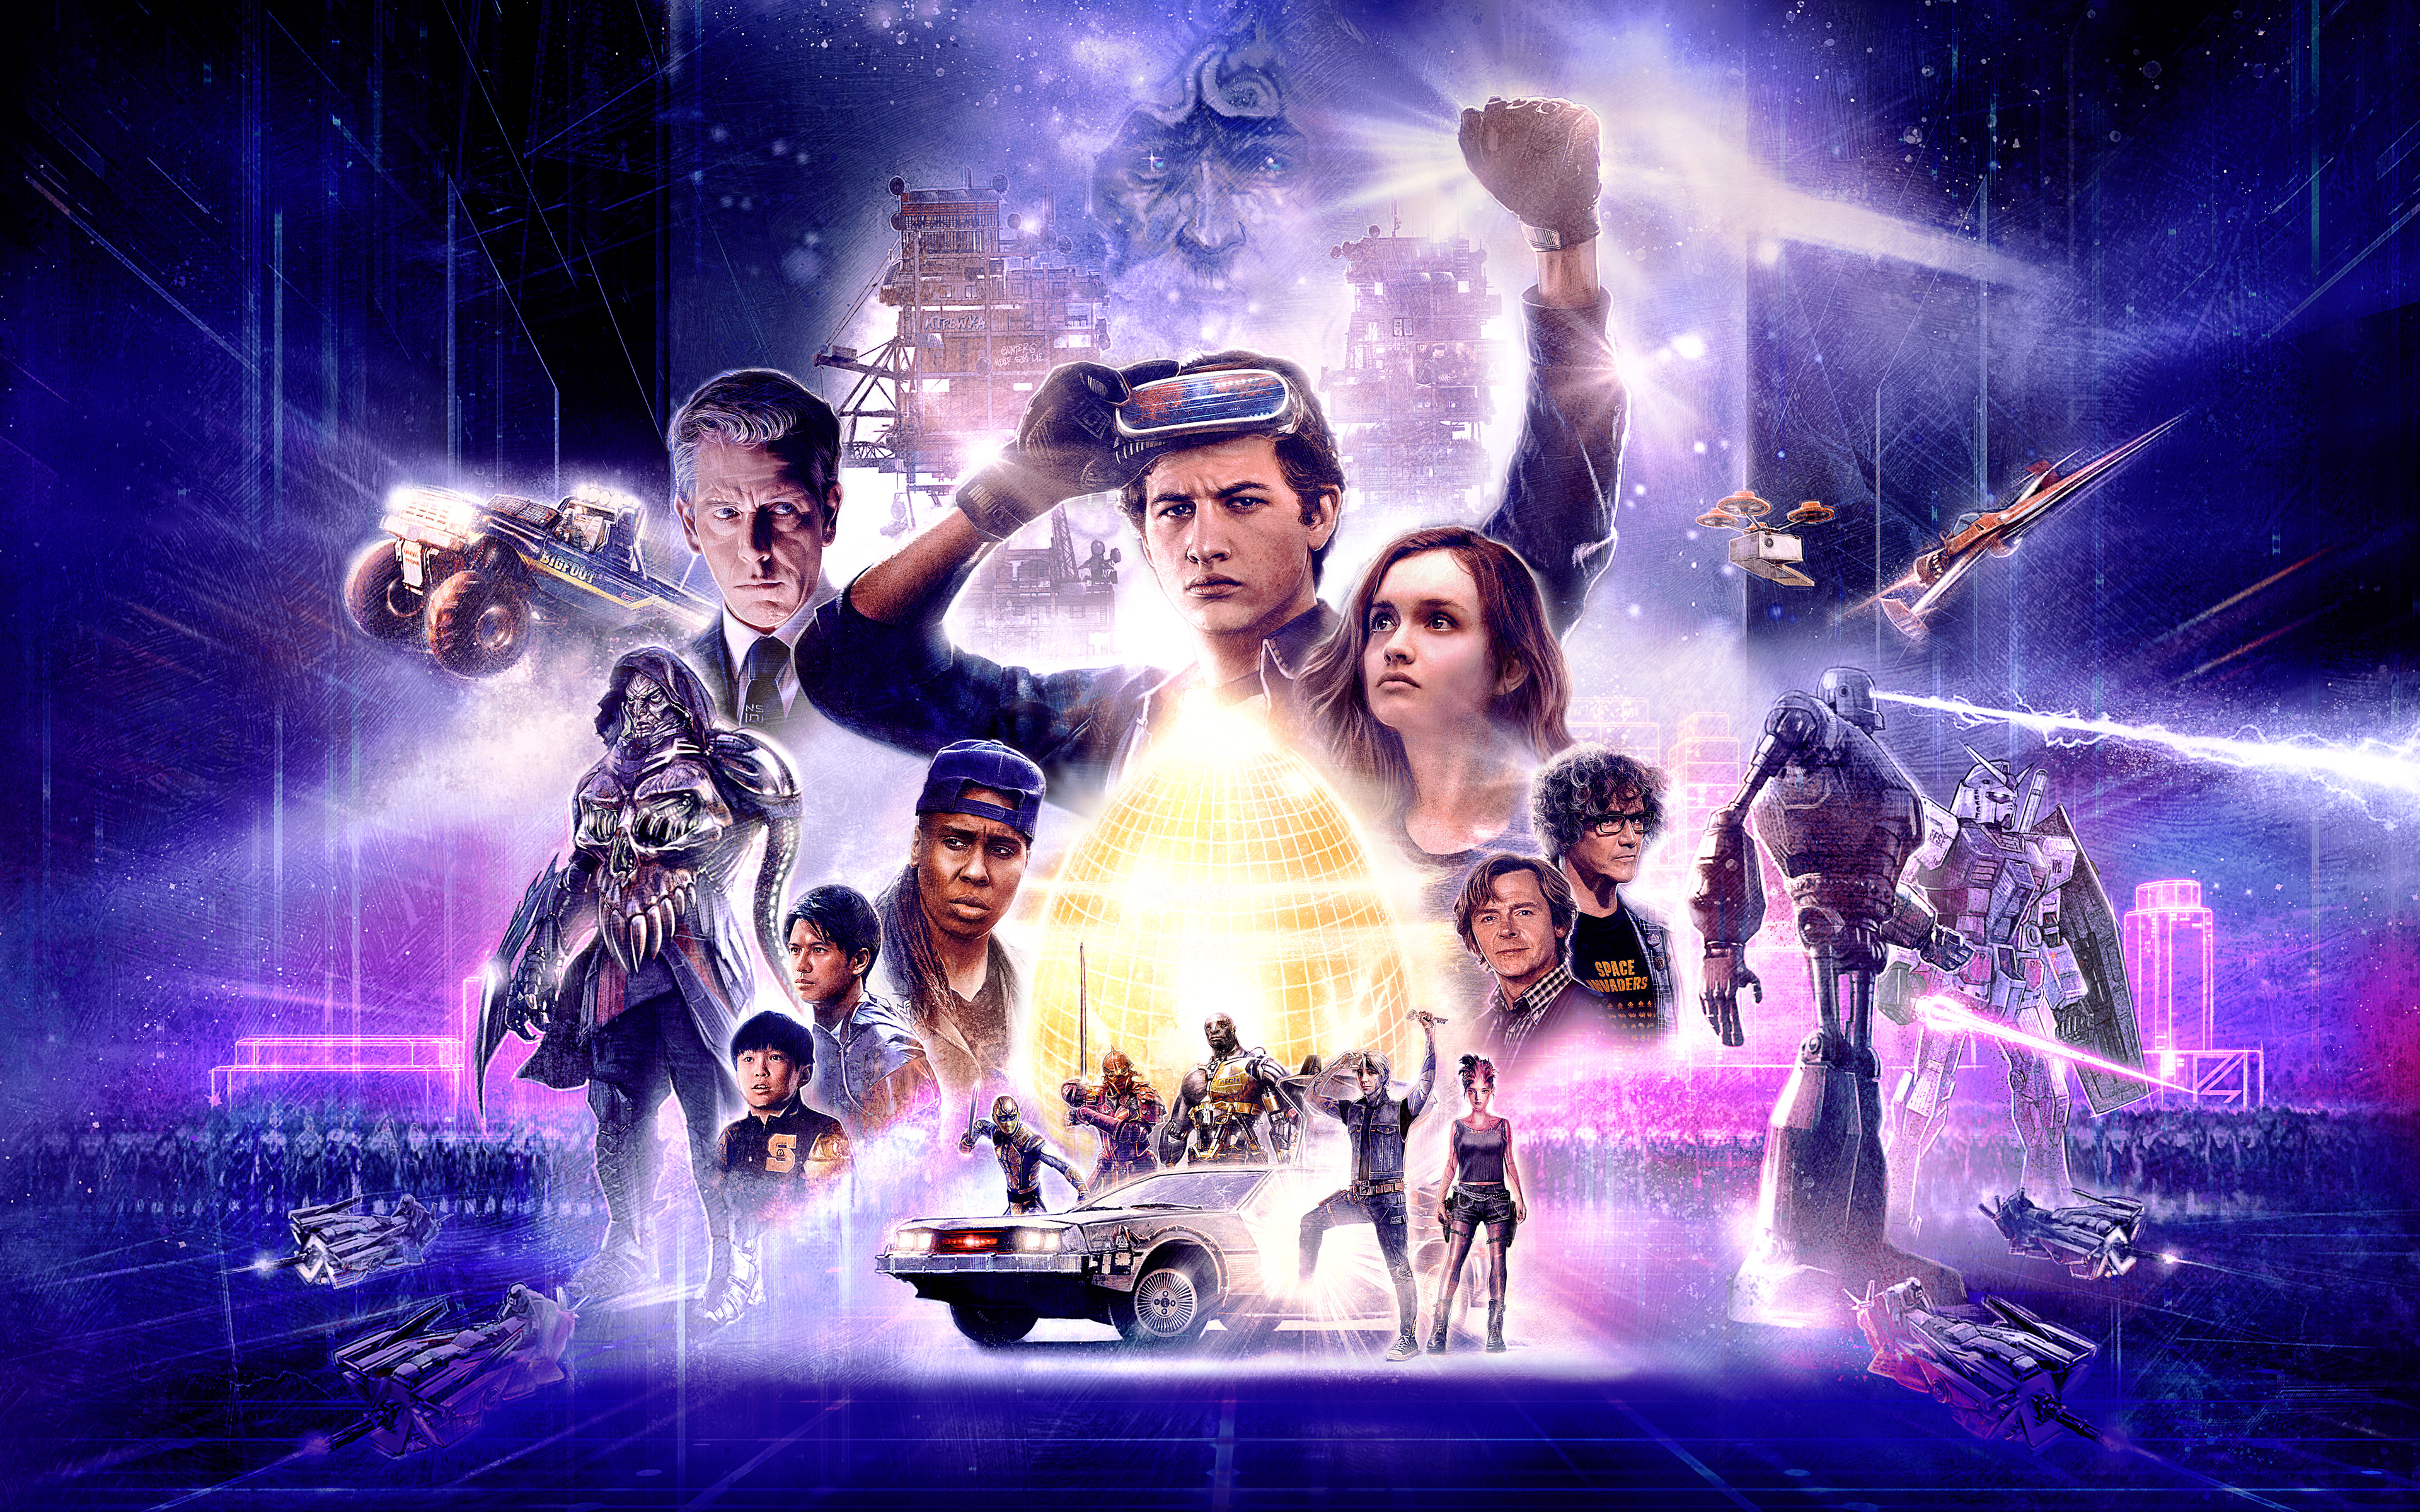 Ready Player One 2018 4K 8K6614418456 - Ready Player One 2018 4K 8K - Ready, Player, One, 2018